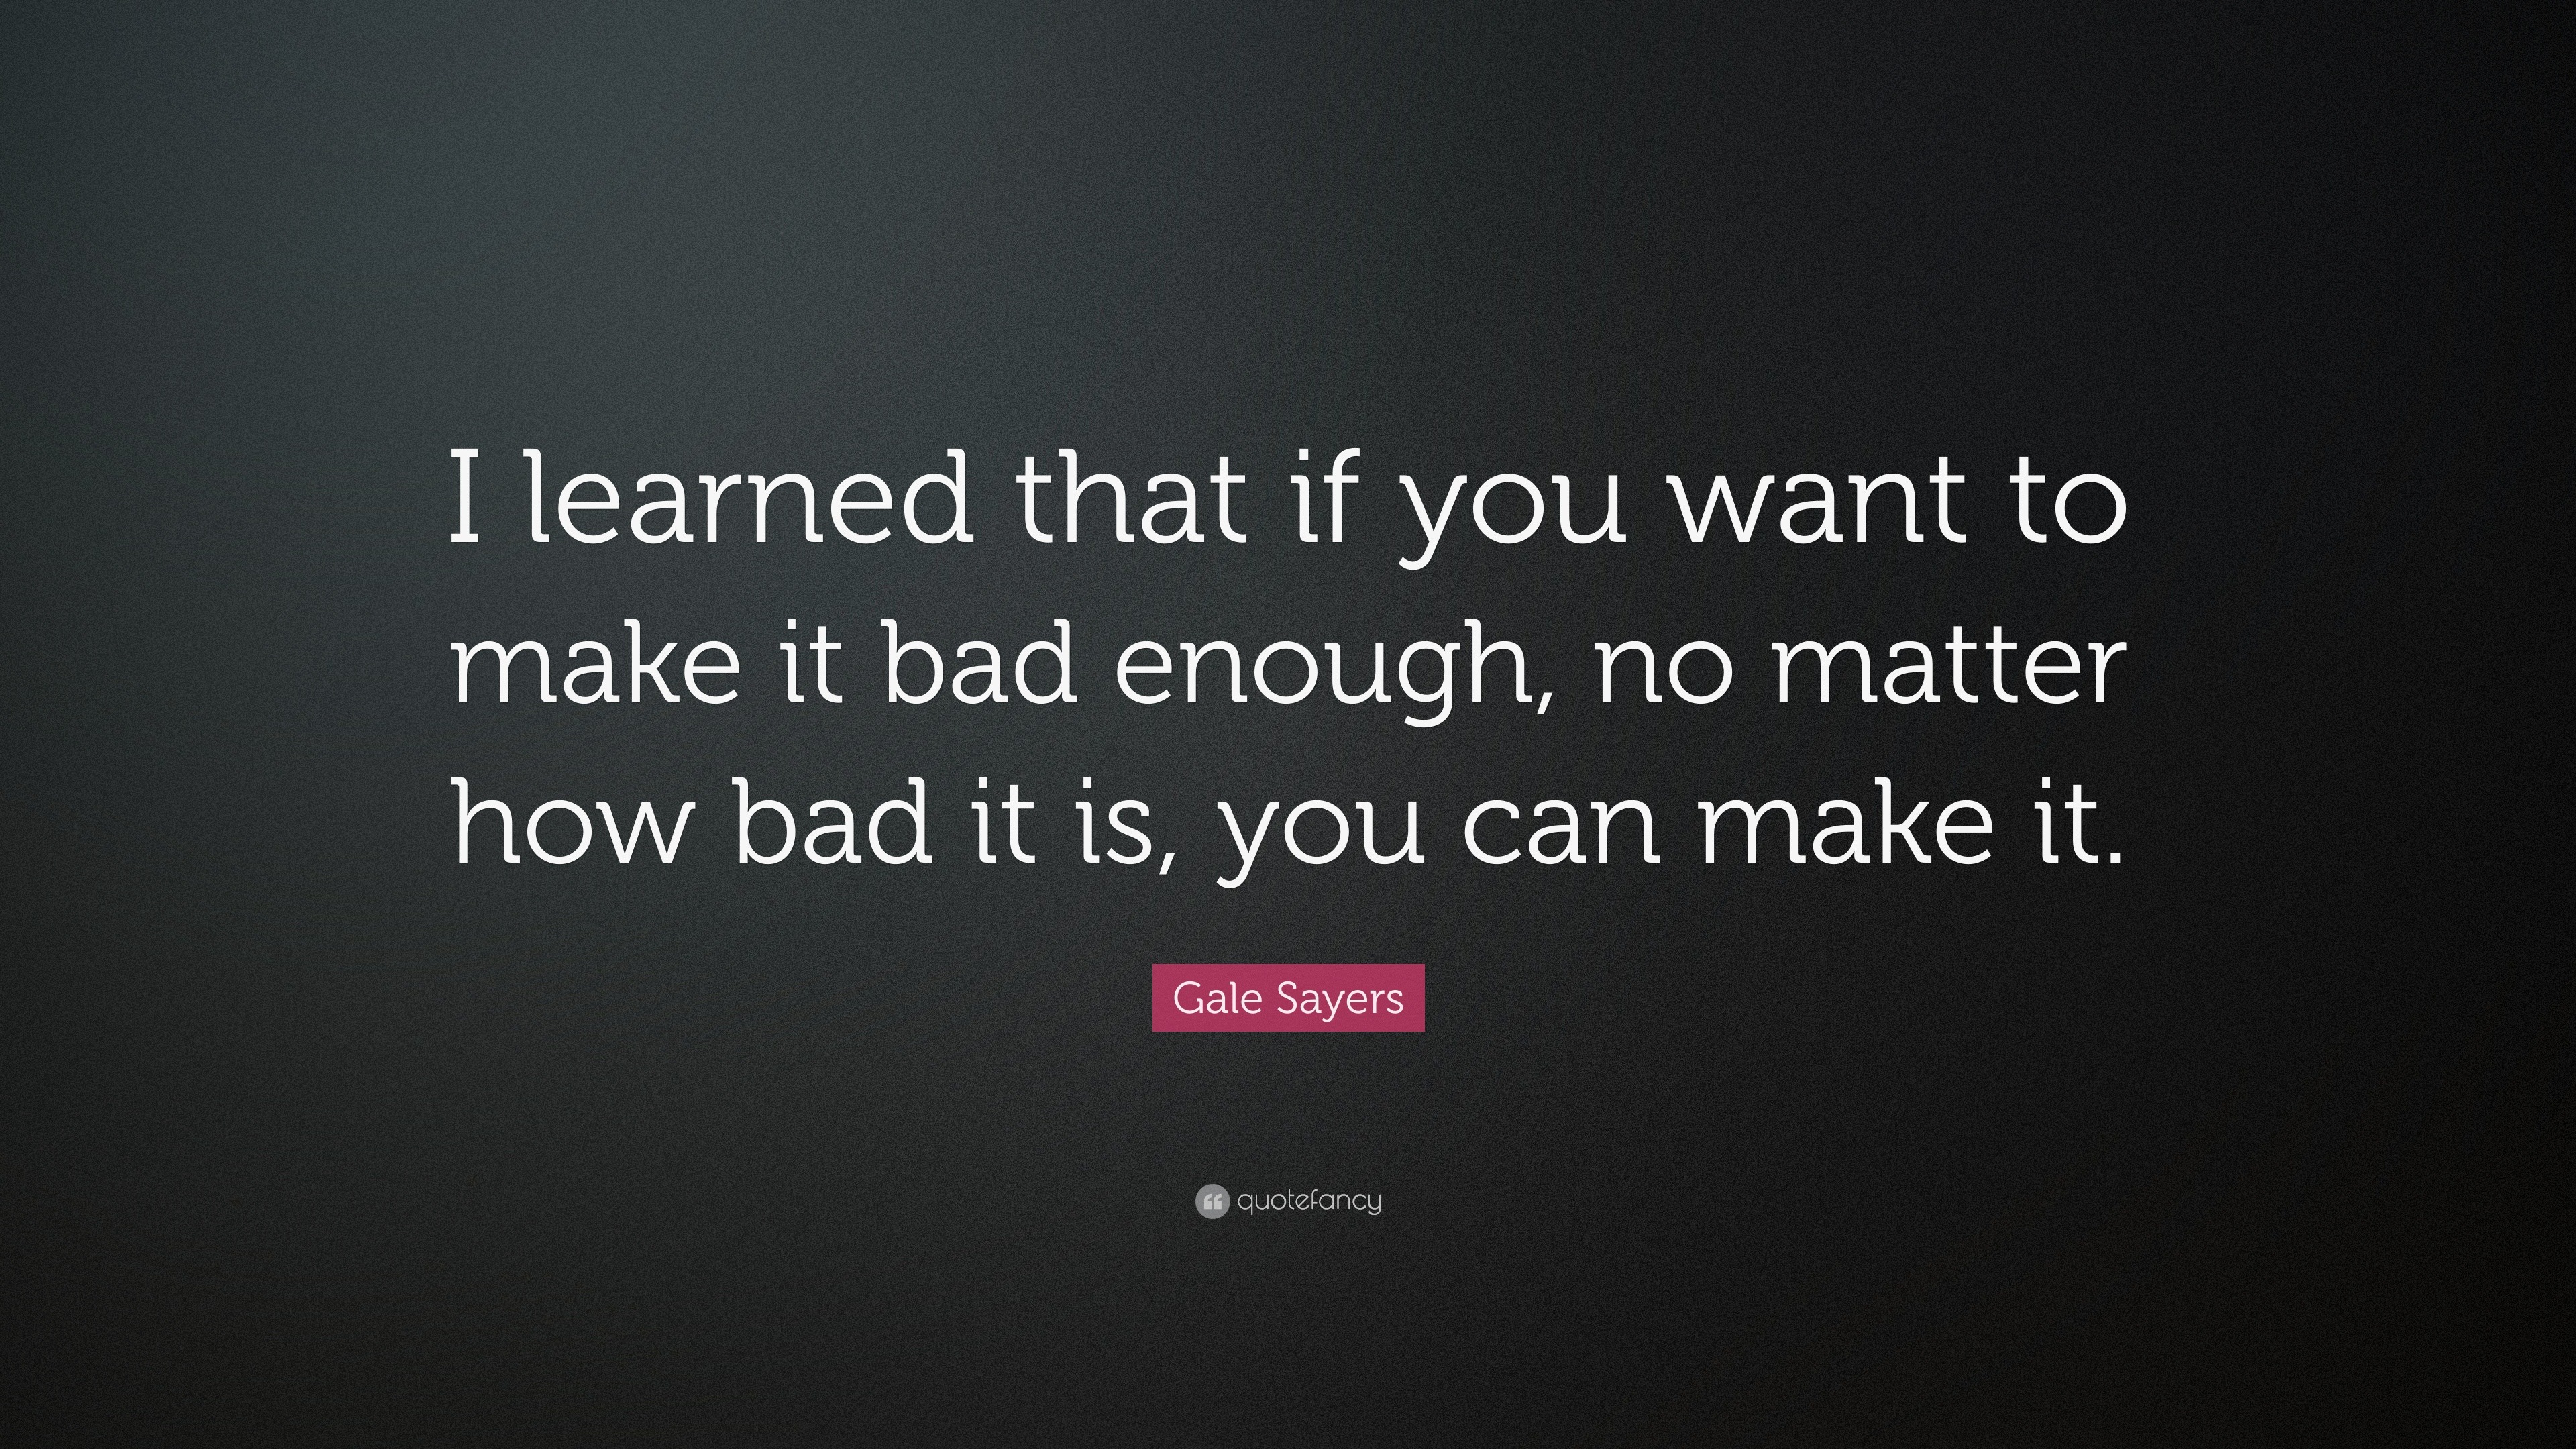 Gale Sayers Quote: "I learned that if you want to make it bad enough, no matter how bad it is ...